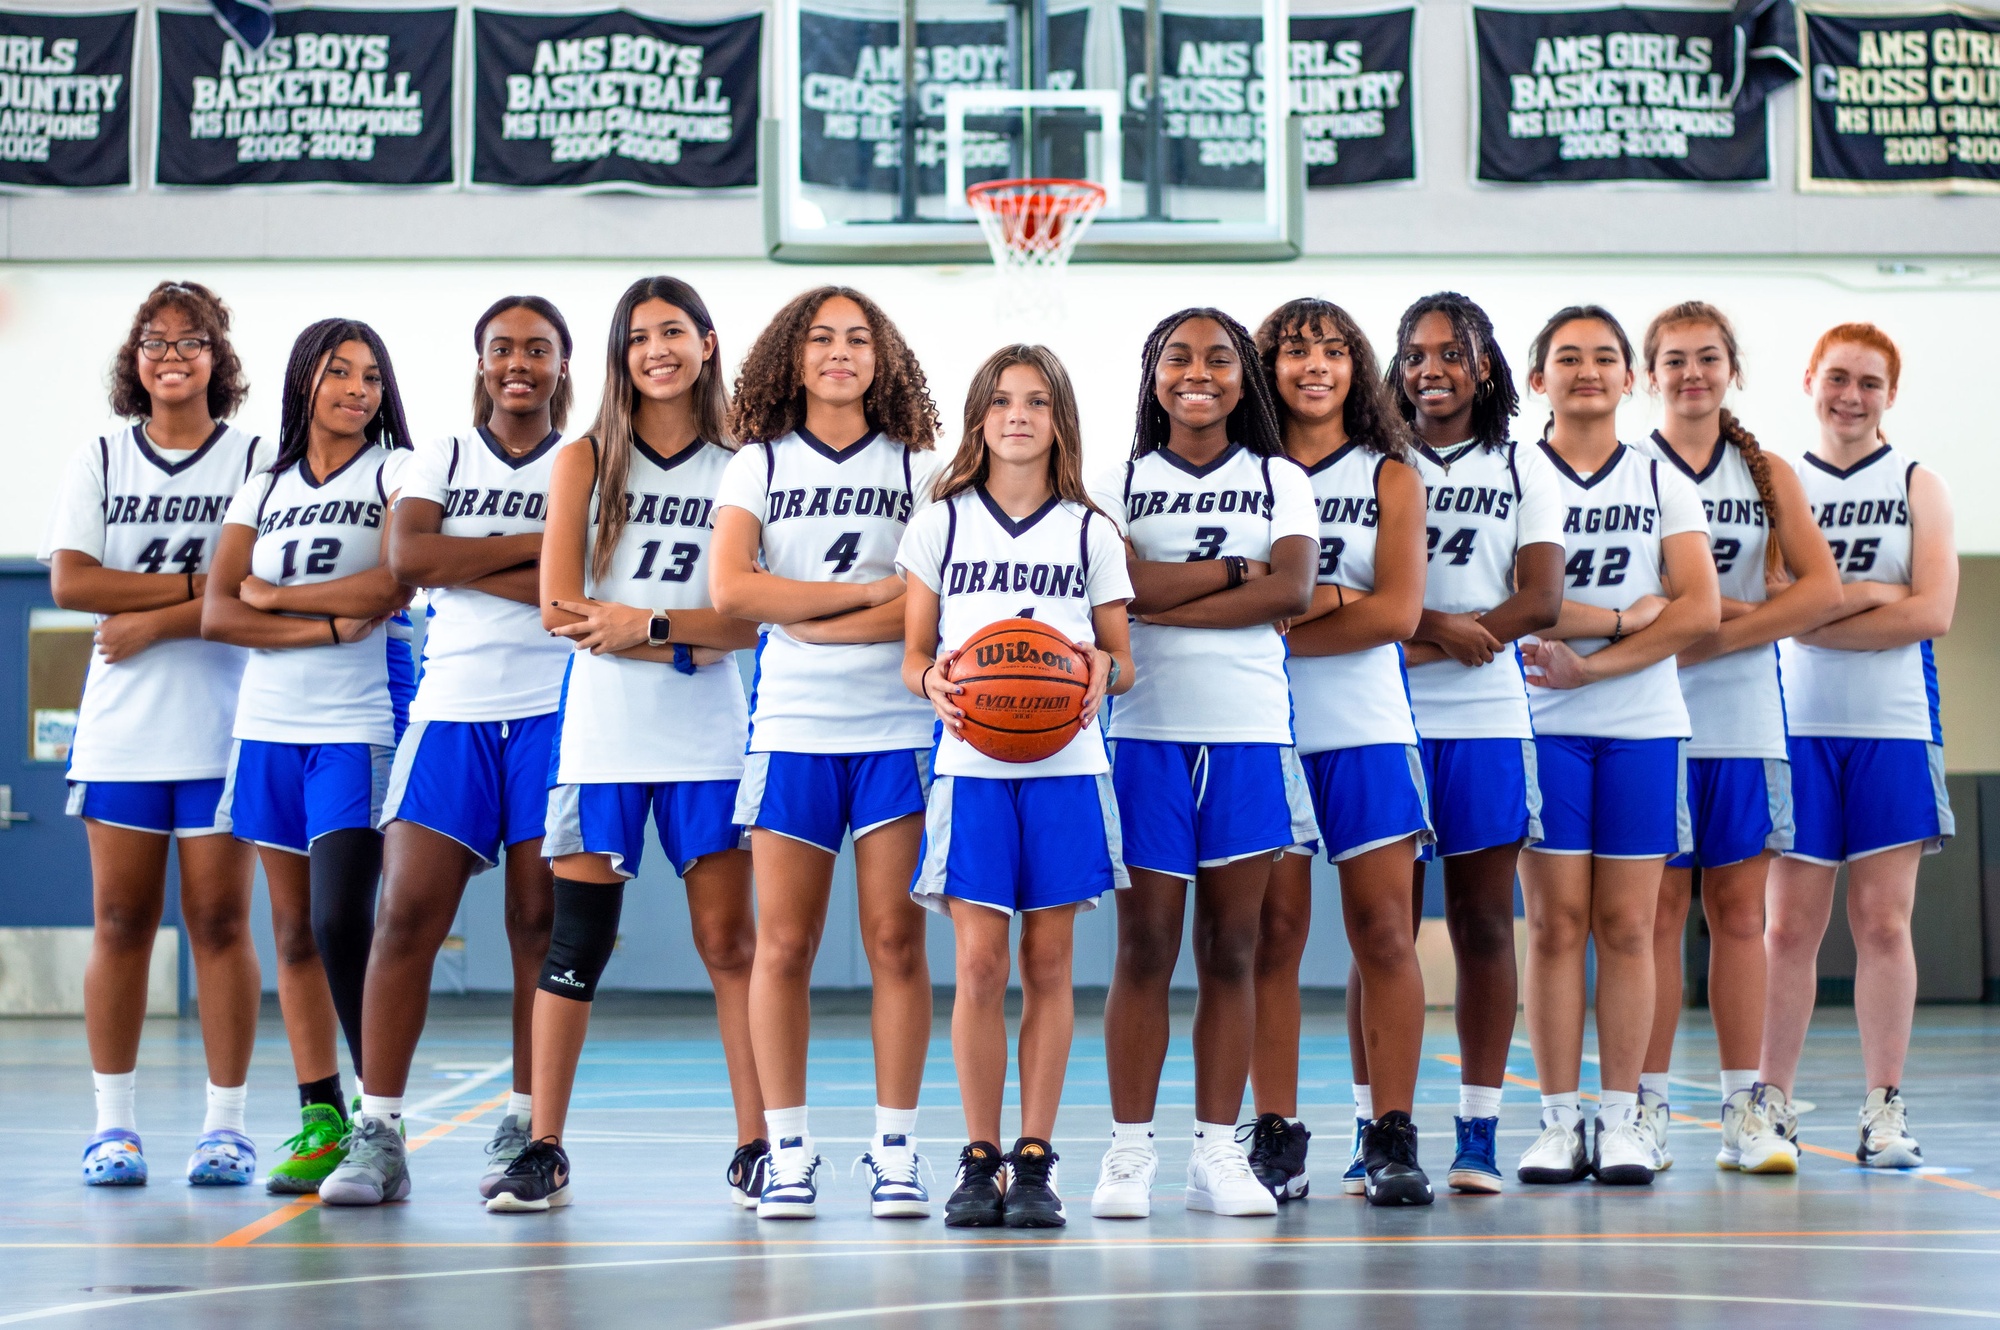 DVIDS - Images - Andersen Middle School girls' basketball team go  undefeated [Image 1 of 5]